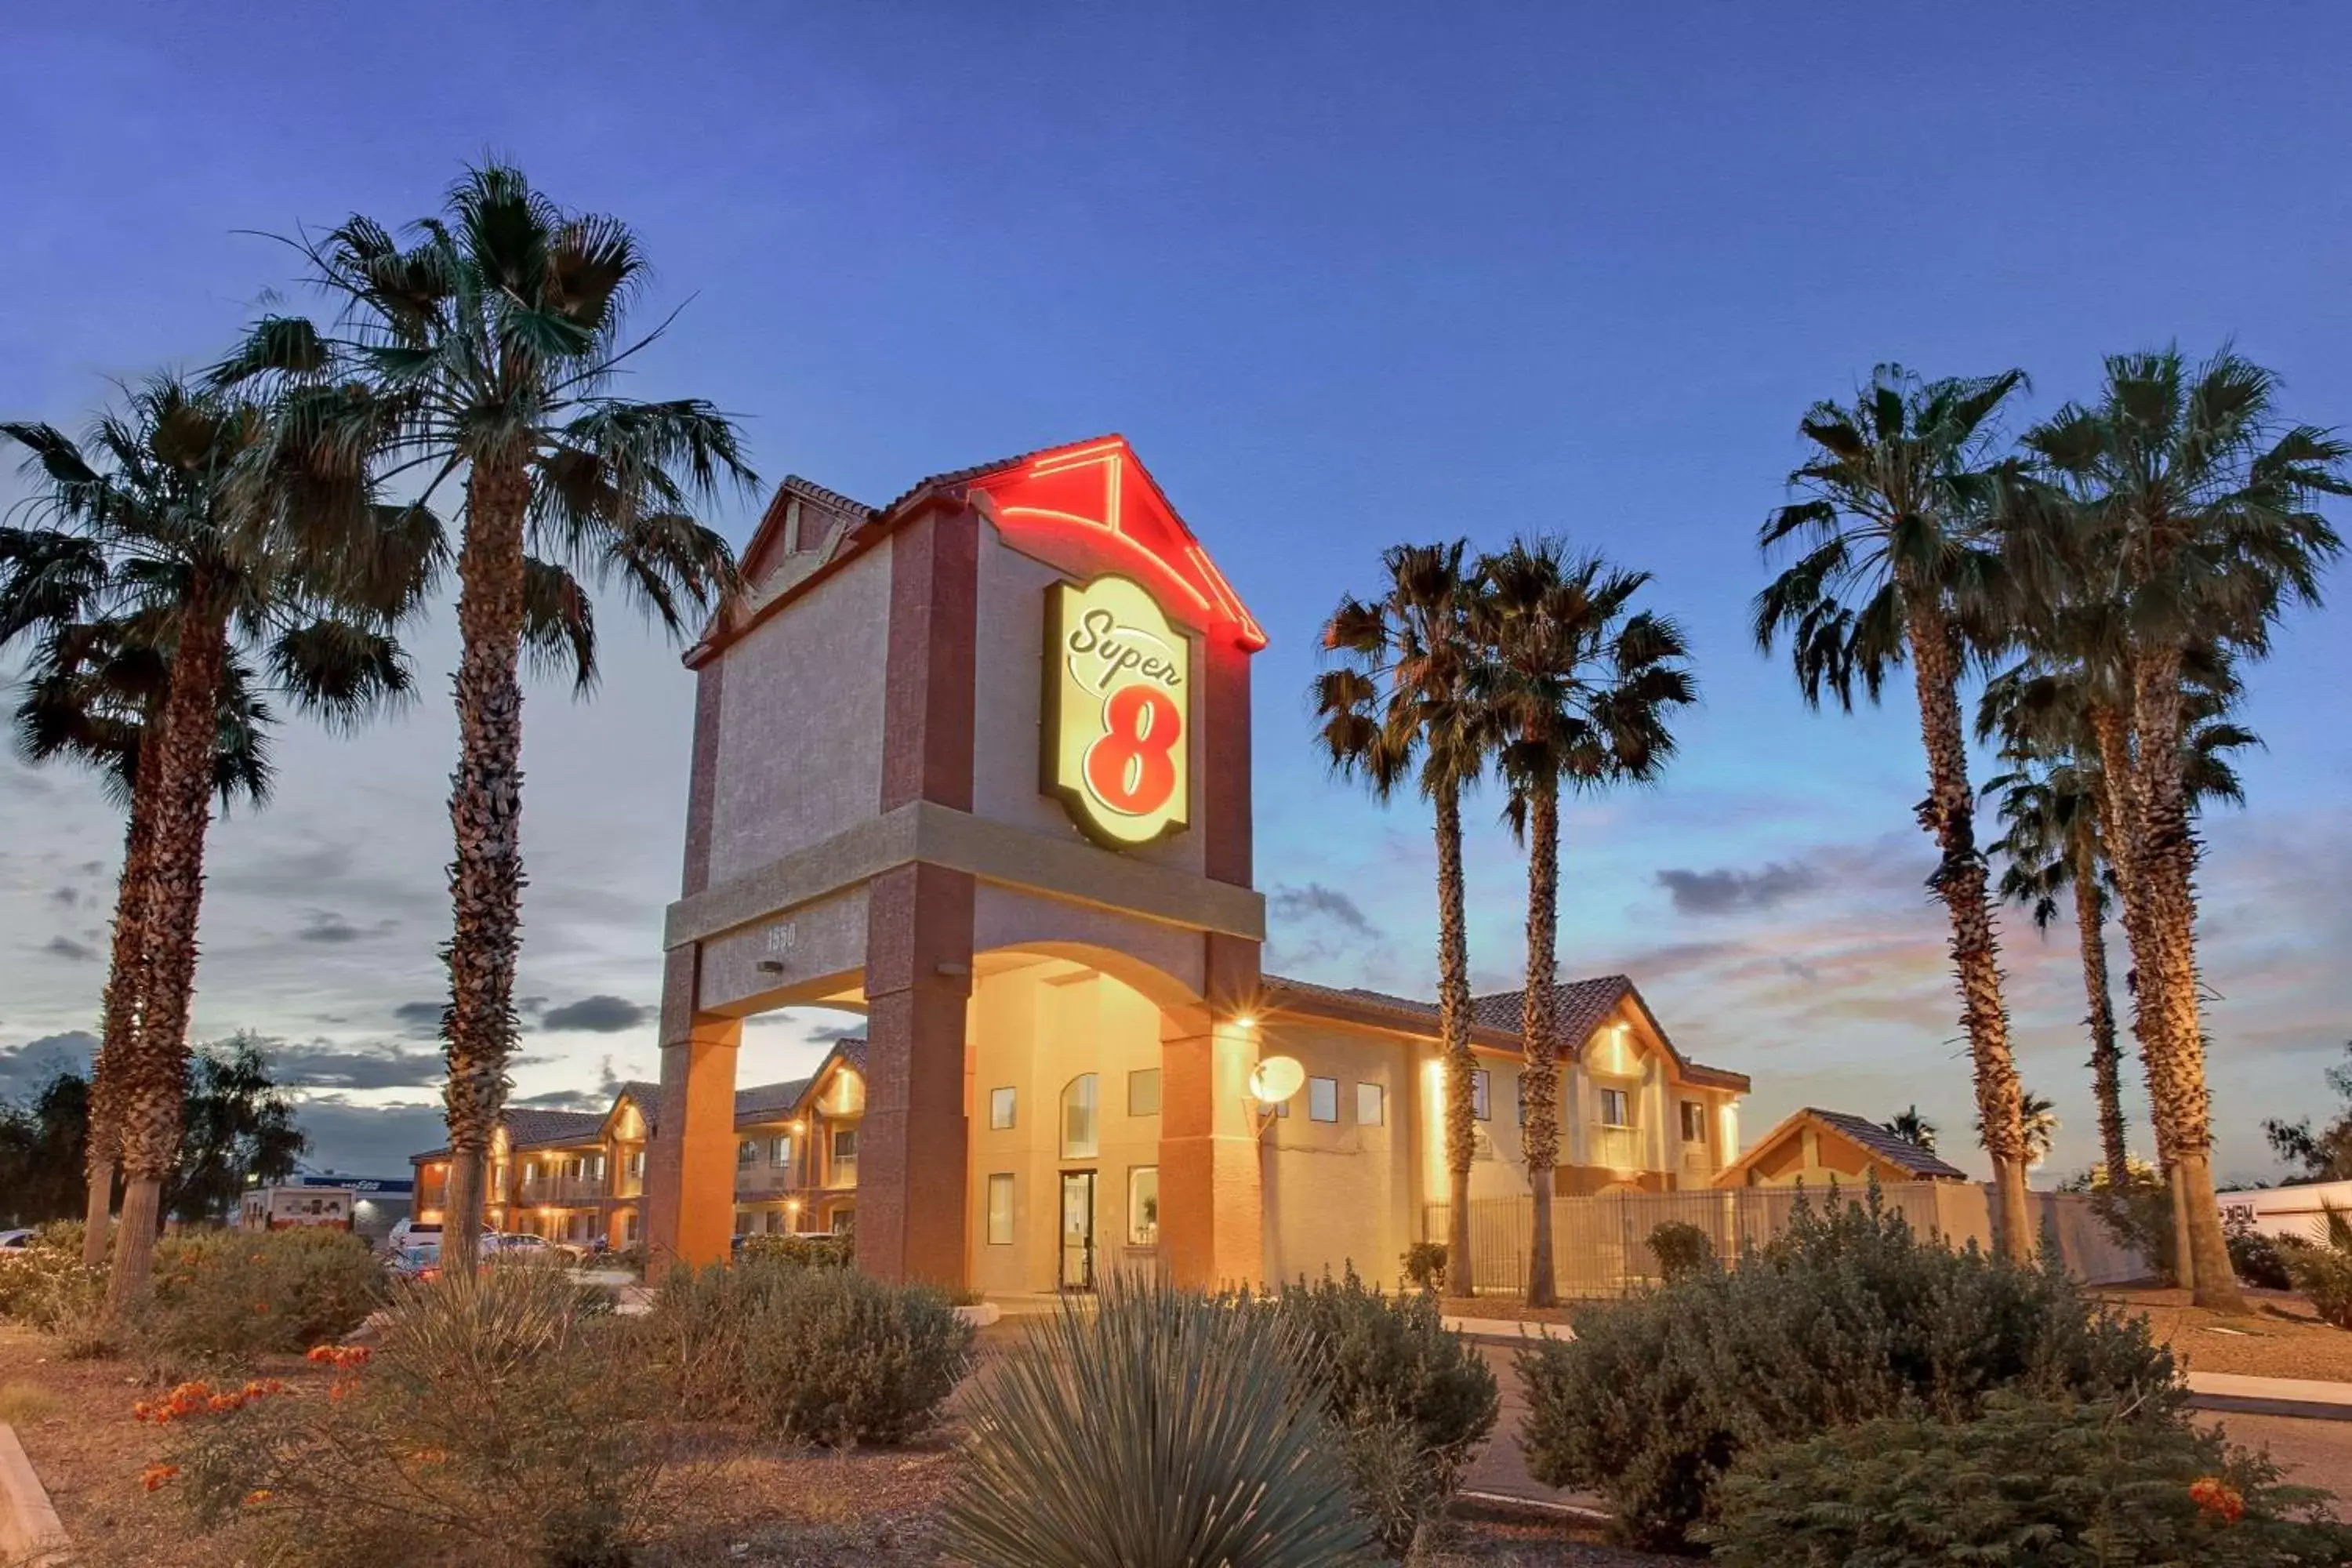 Property Building in Super 8 by Wyndham Tucson/Grant Road Area AZ